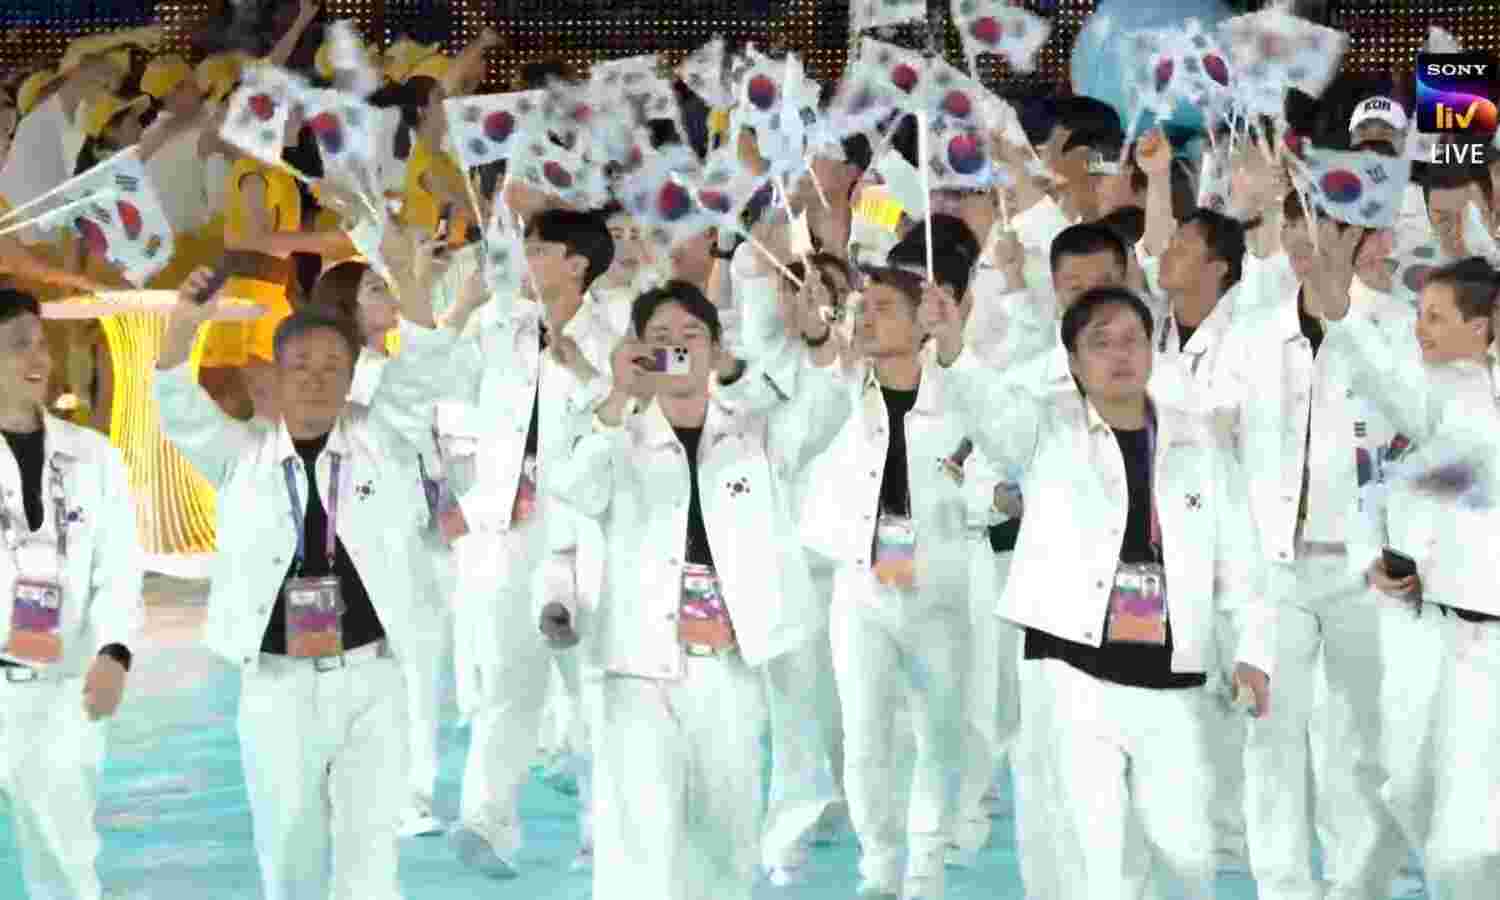 The South Koreans, in for the medal hunt, make a..